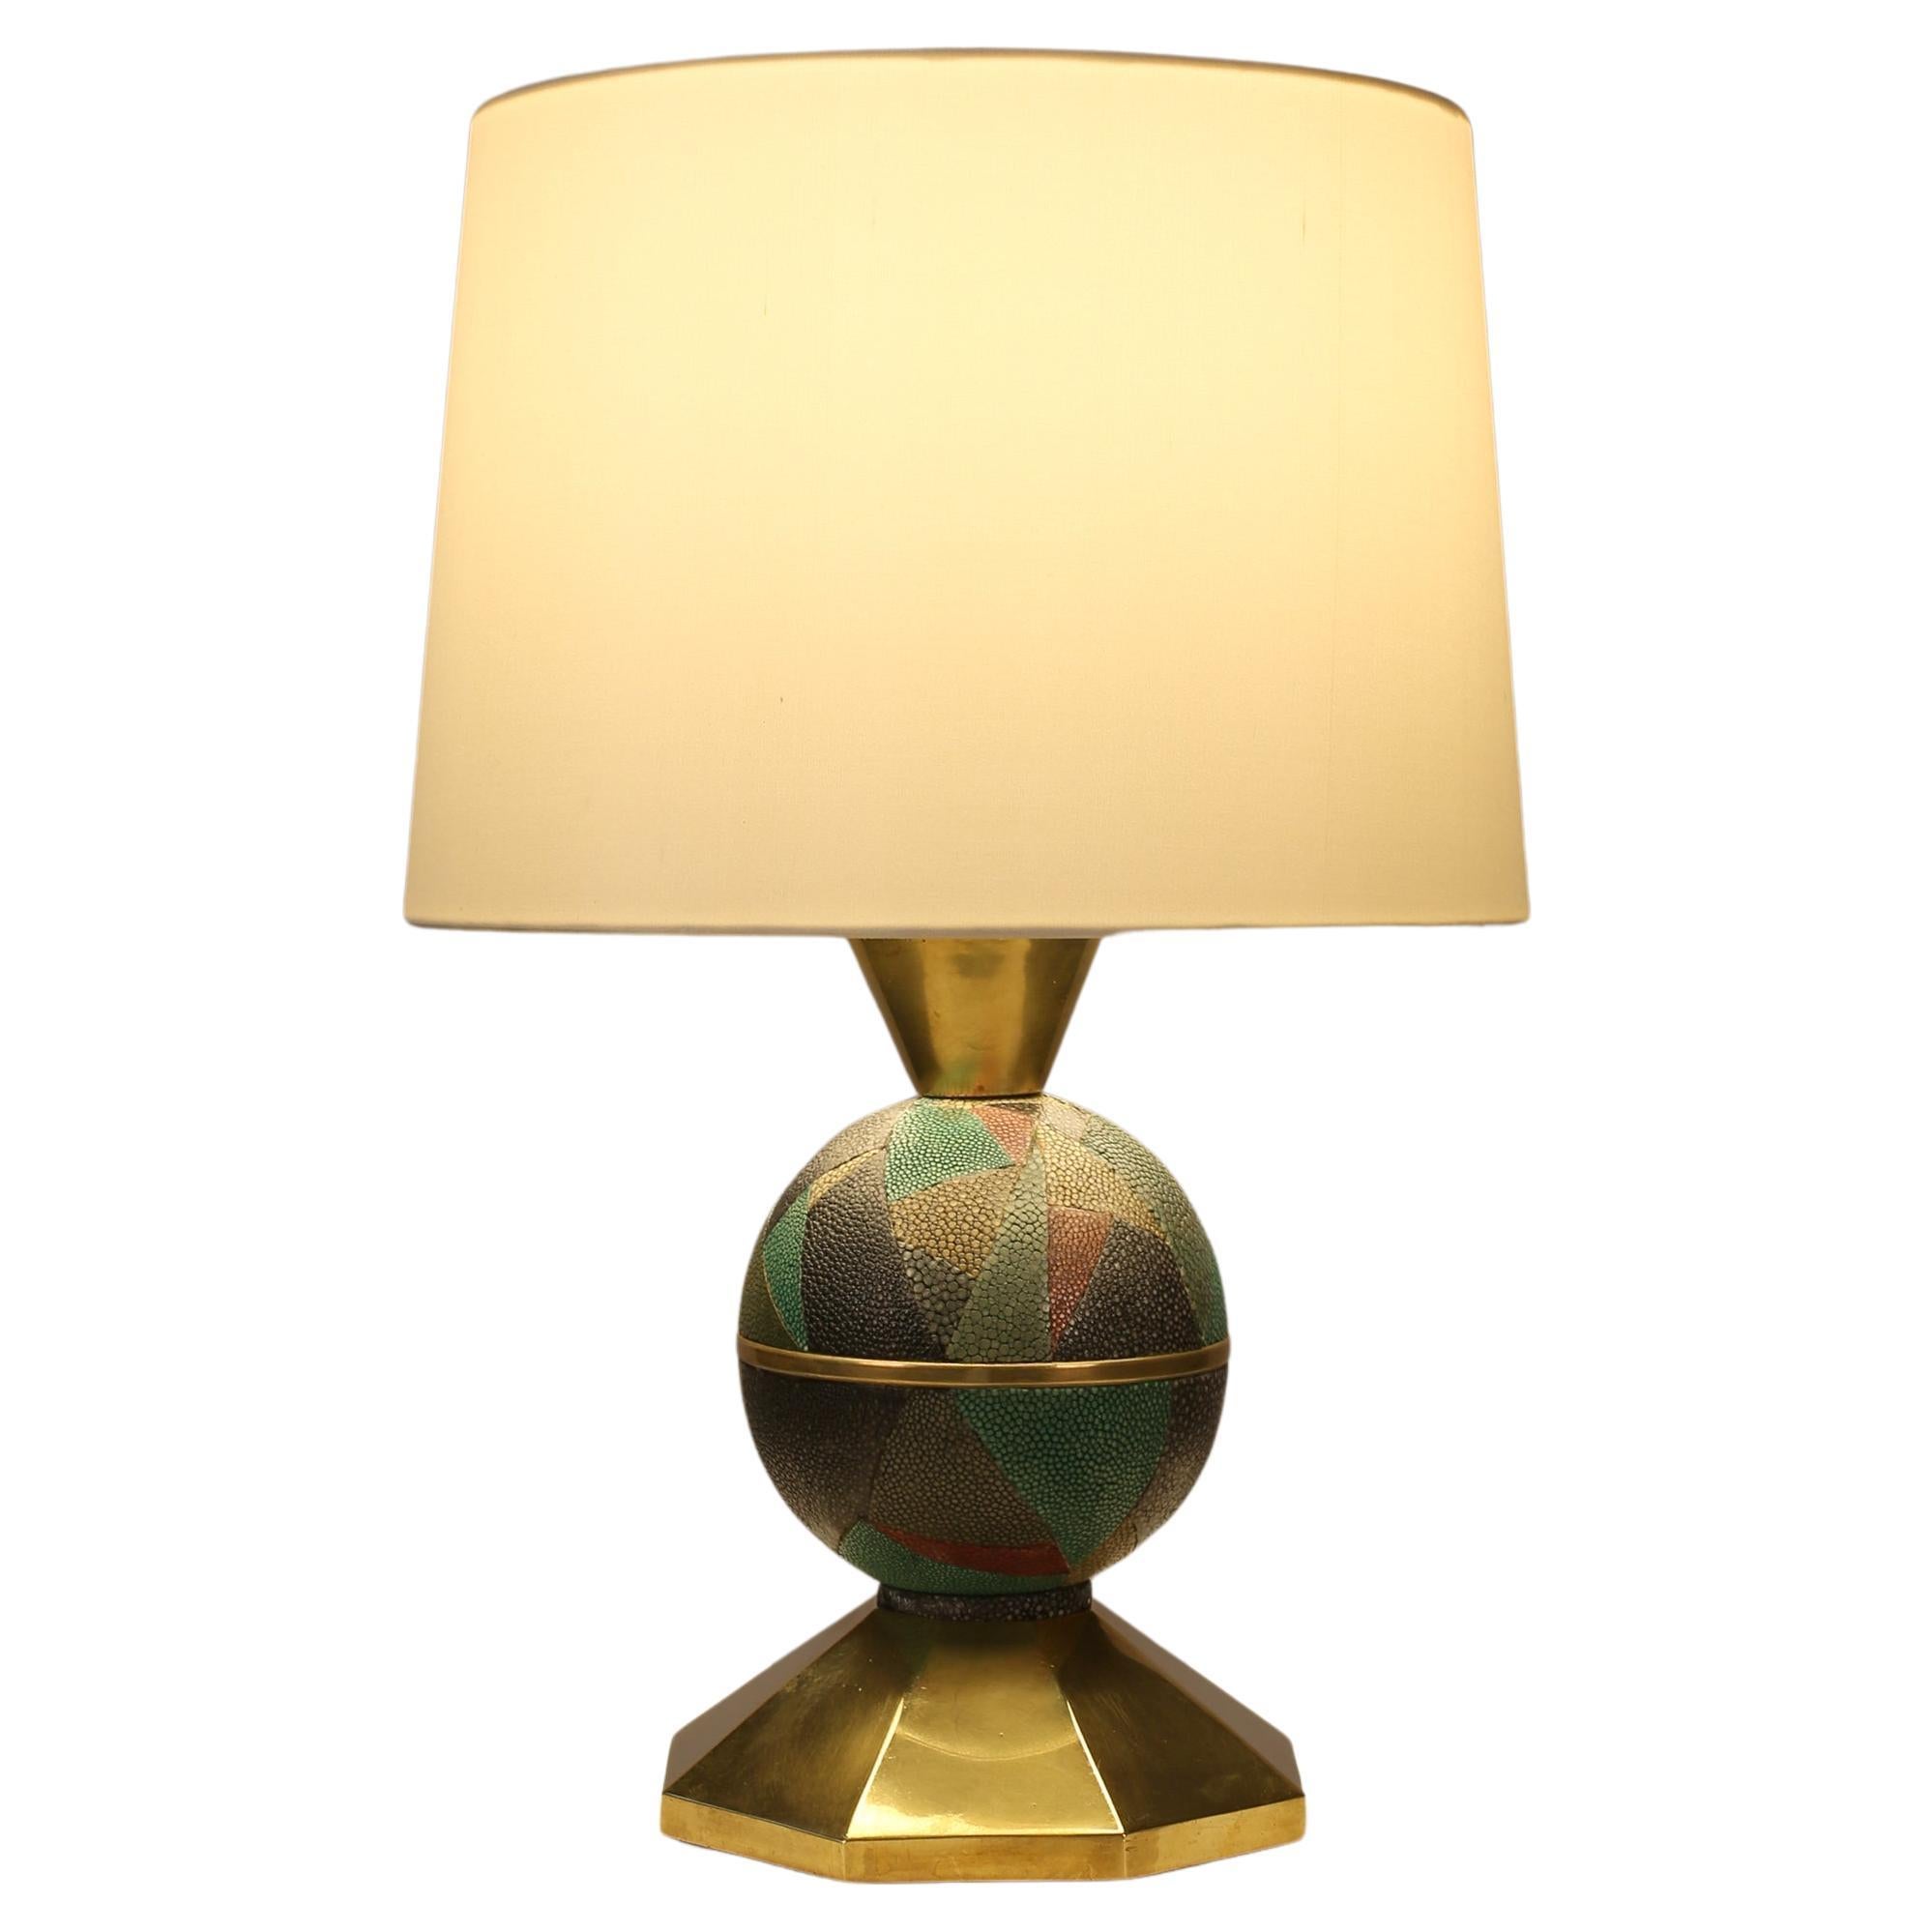 French 1930s Art Deco Table Lamp by André Groult in Galuchat & Gilt Bronze